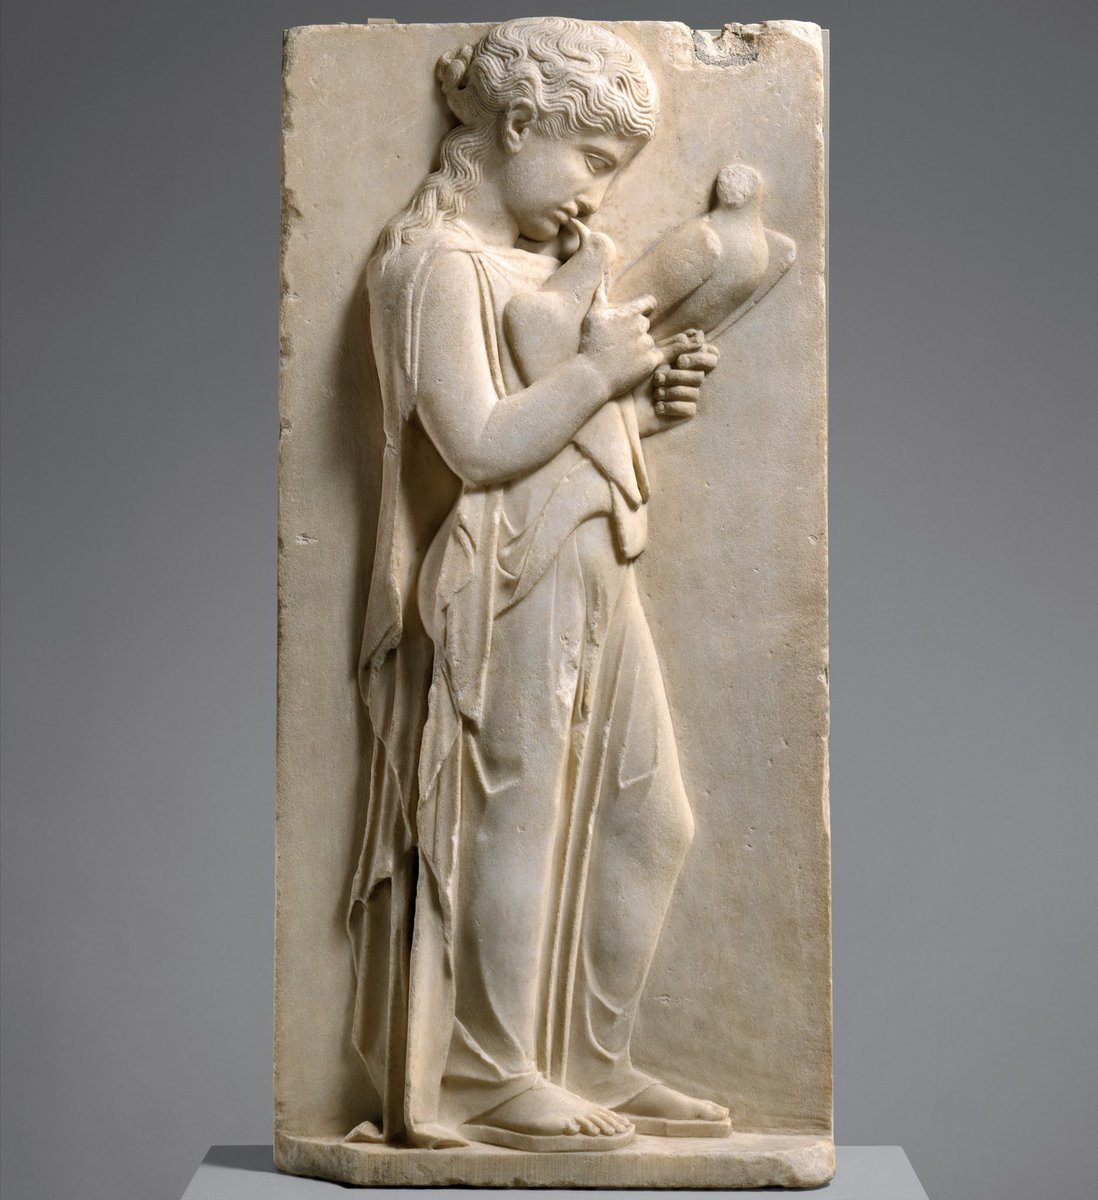 #ReliefWednesday Greek marble grave stele of a girl ~ c. 450-440 BCE Every child is precious. This stele memorialising a lost girl who loved doves is heart wrenching for the beauty and the grief conveyed. 🏛 The Met, 27.45